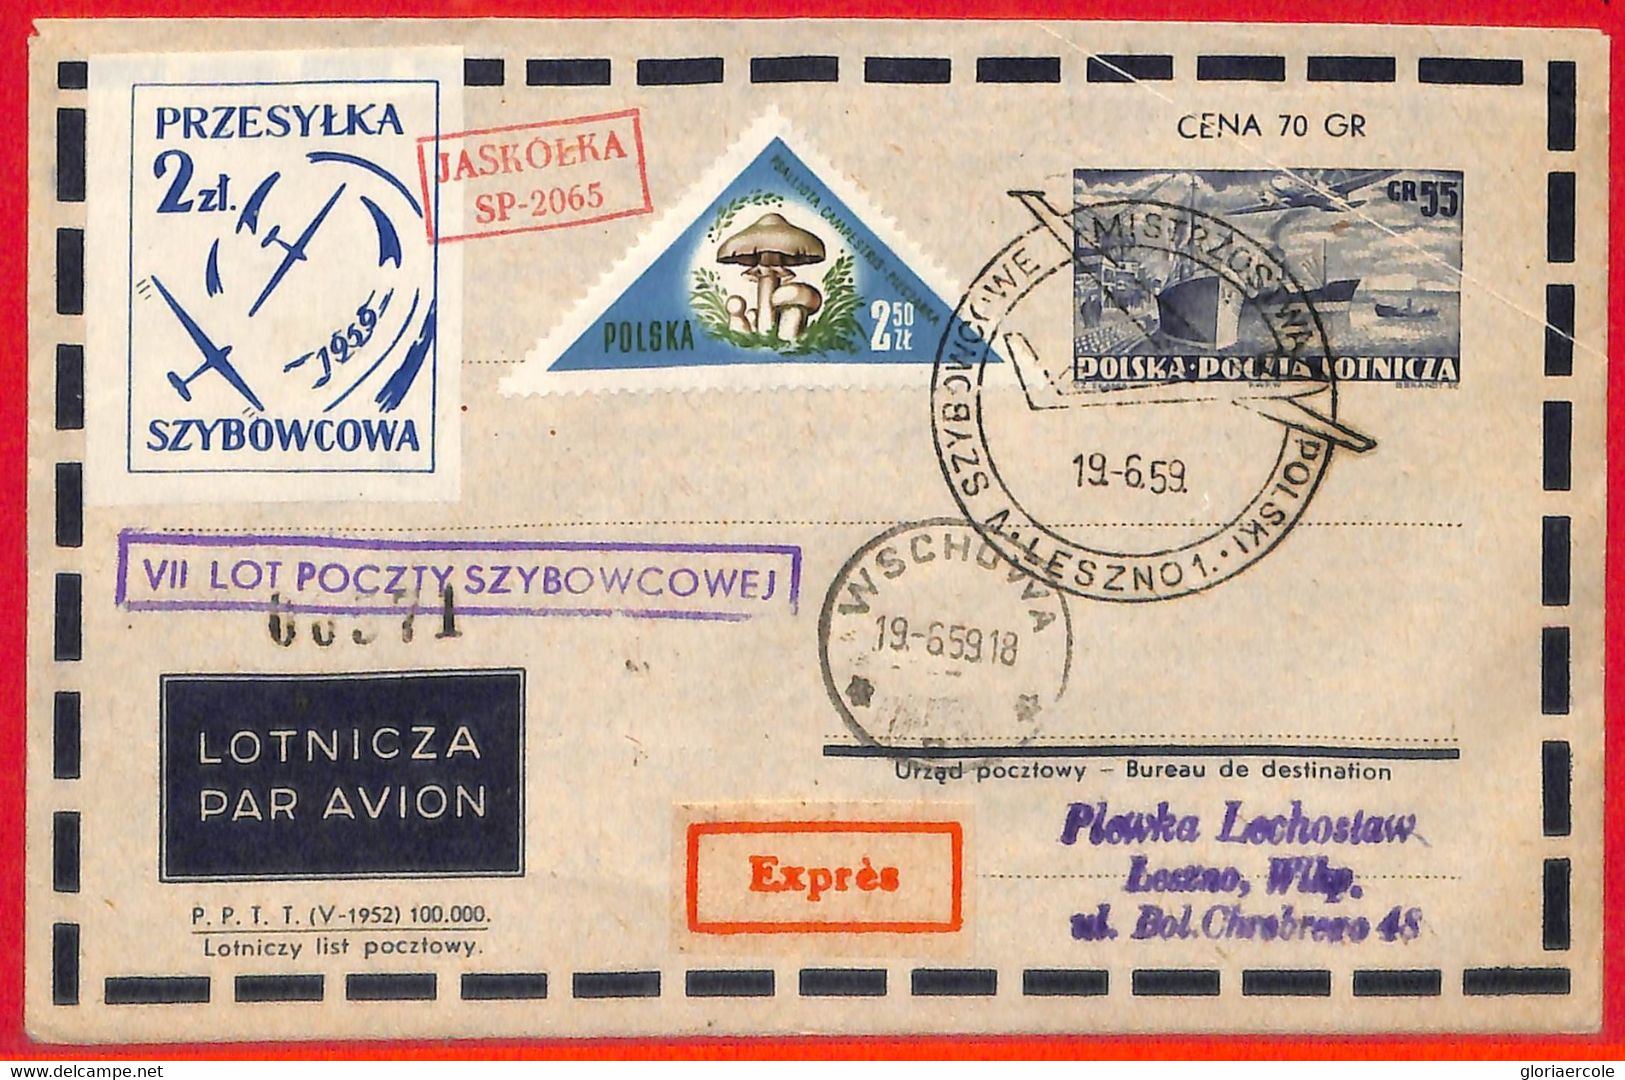 Aa3413 - POLONIA - Postal History - GLIDER FLIGHT Cover 1959 - Flugzeuge